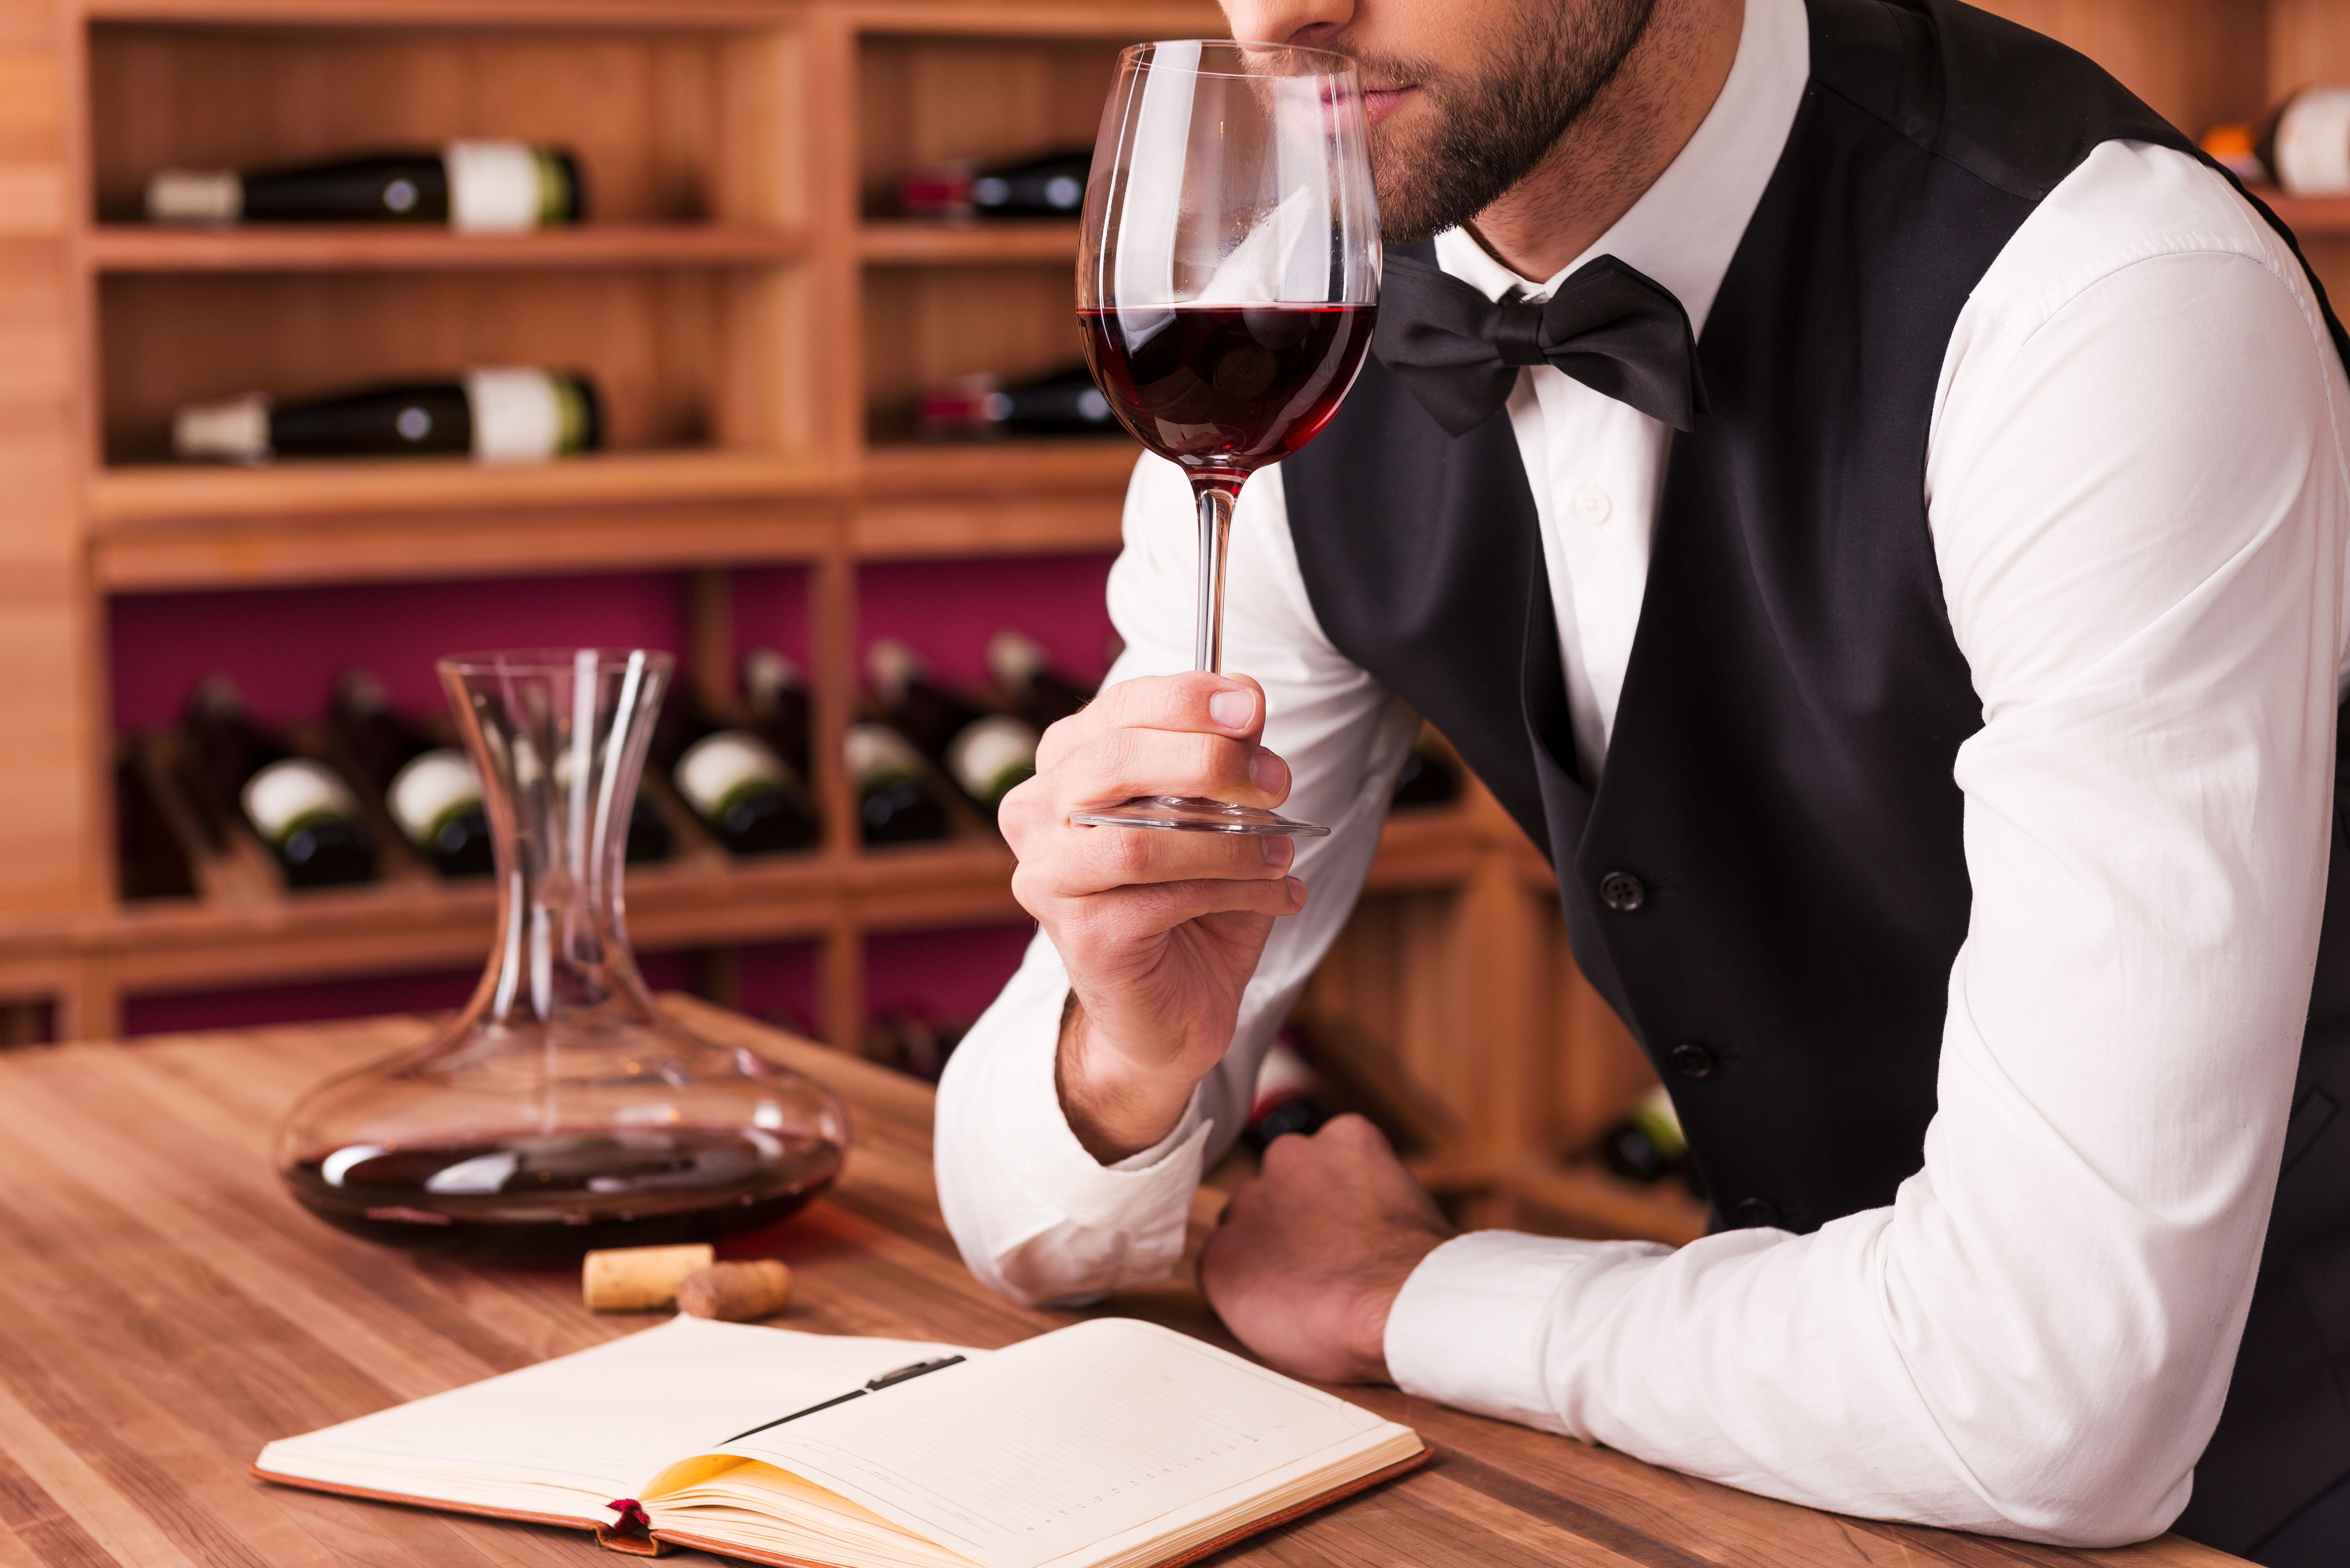 Sommelier examining wine. [08JANUARY2016 FEATURES FOOD DRINK]